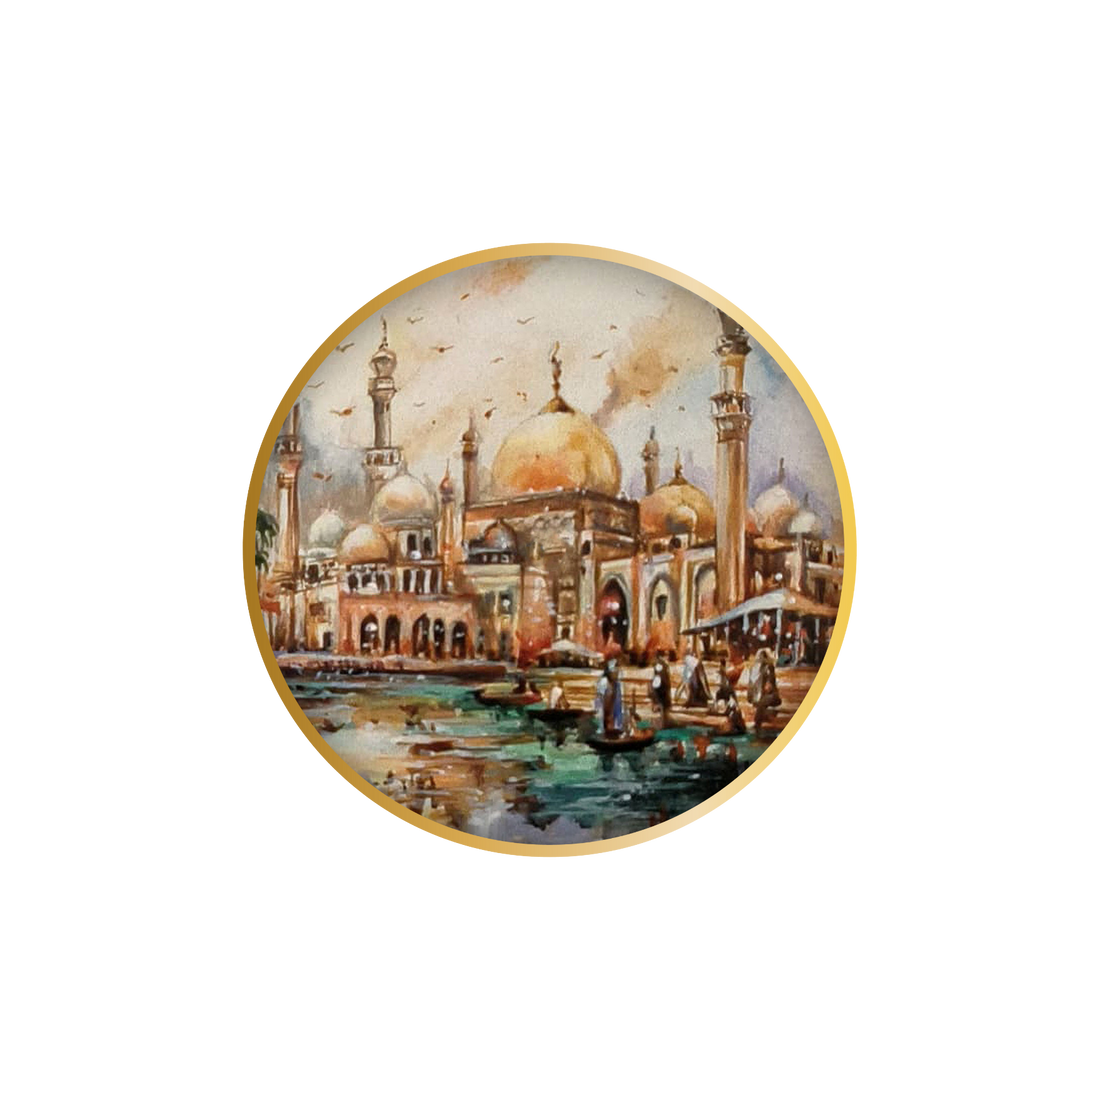 Hand-Painted Miniature Art Watch - Baghdad Inspired - B360 Unique Watches